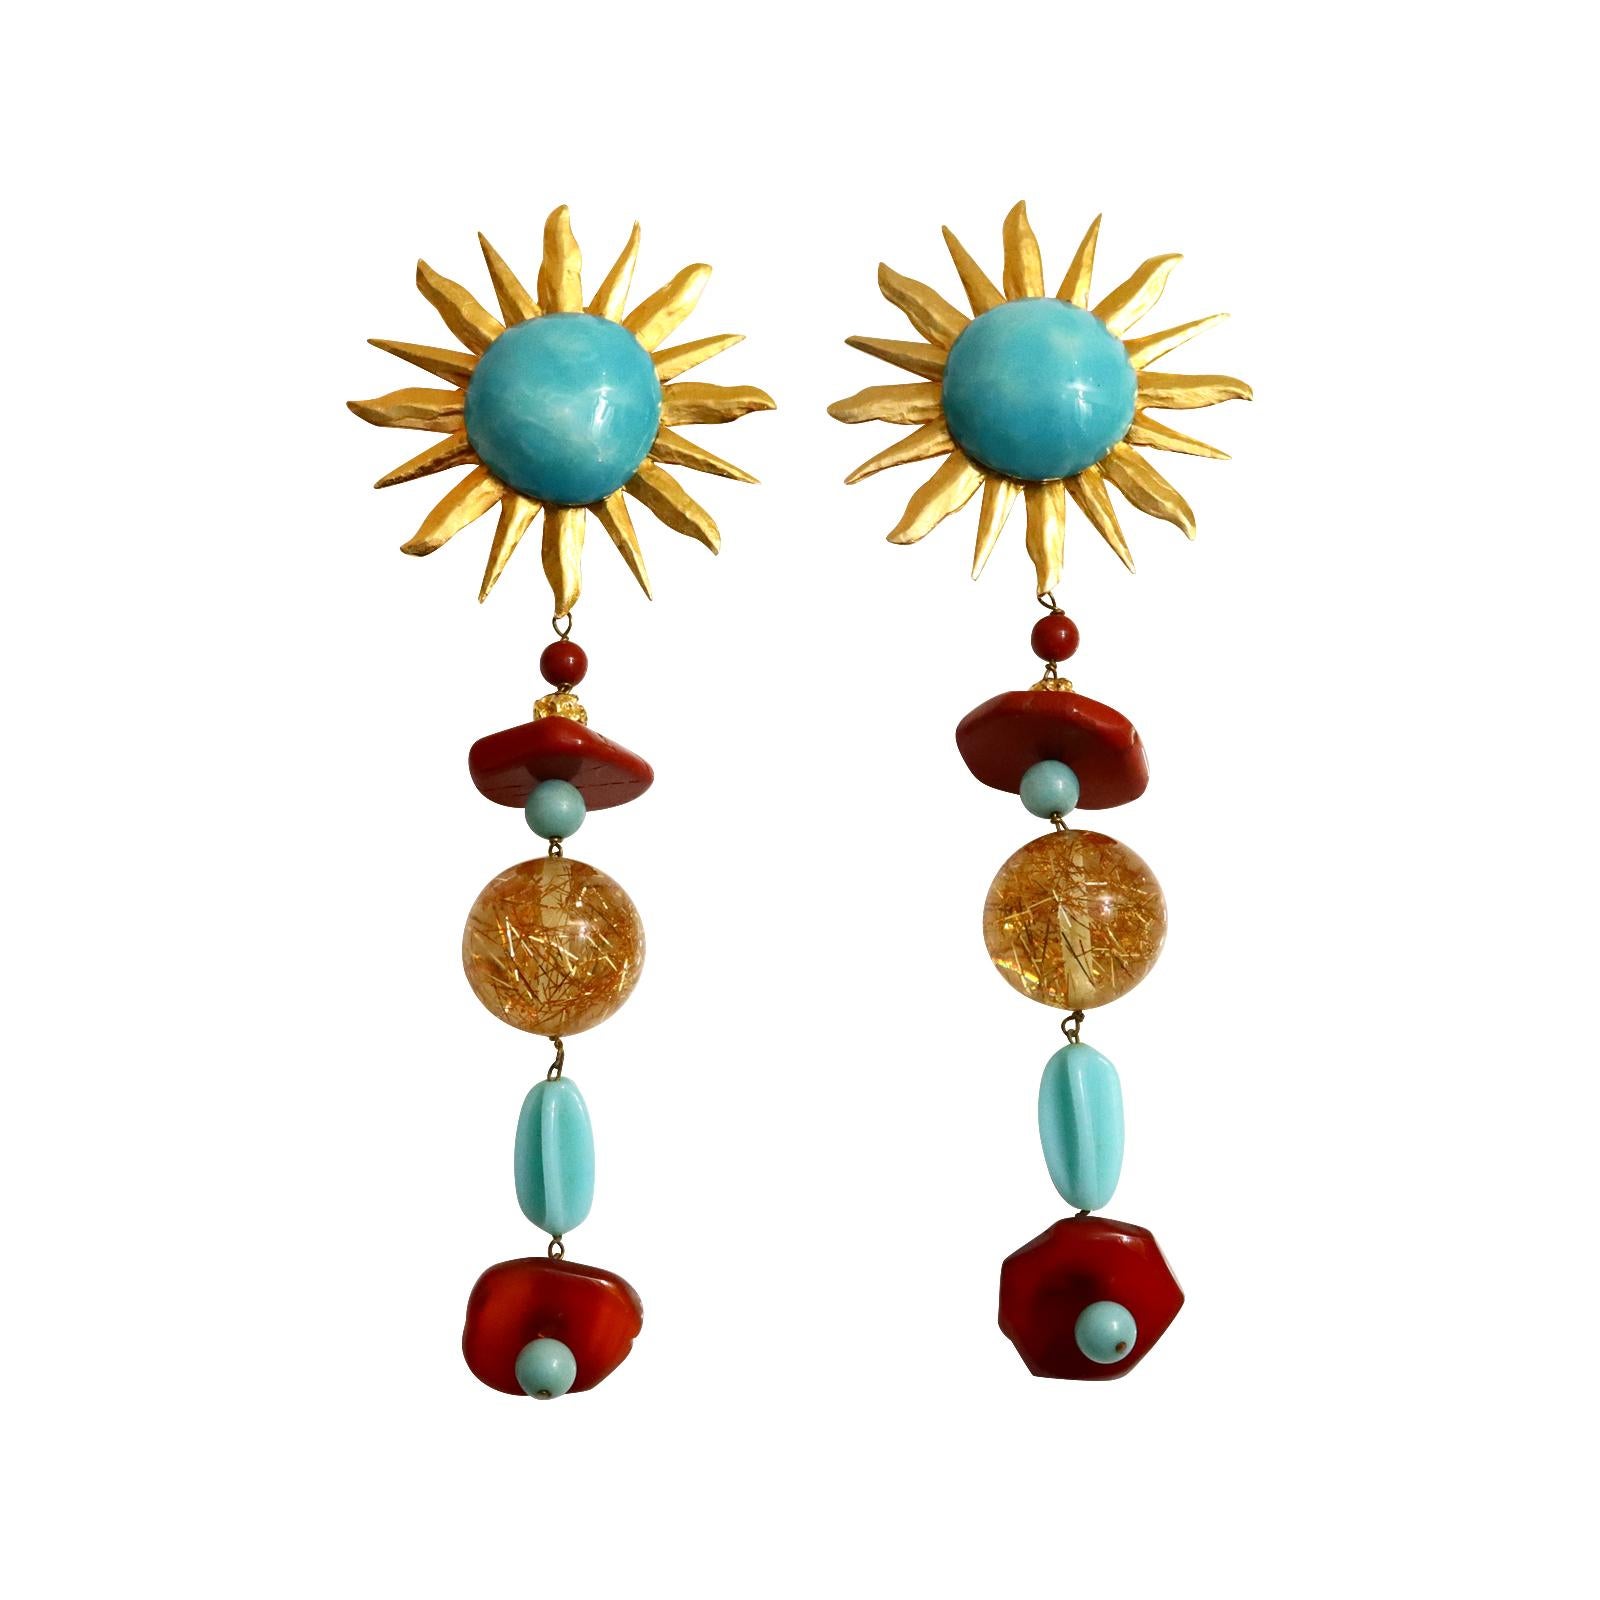 Vintage Yves Saint Laurent YSL Couture Sun Burst Long Dangling Earrings Circa 1980s. These have Faux turquoise, amber, gold beads, quartz beads.  These were created for the YSL defile runway.  They are not signed but have the plaque.  These will